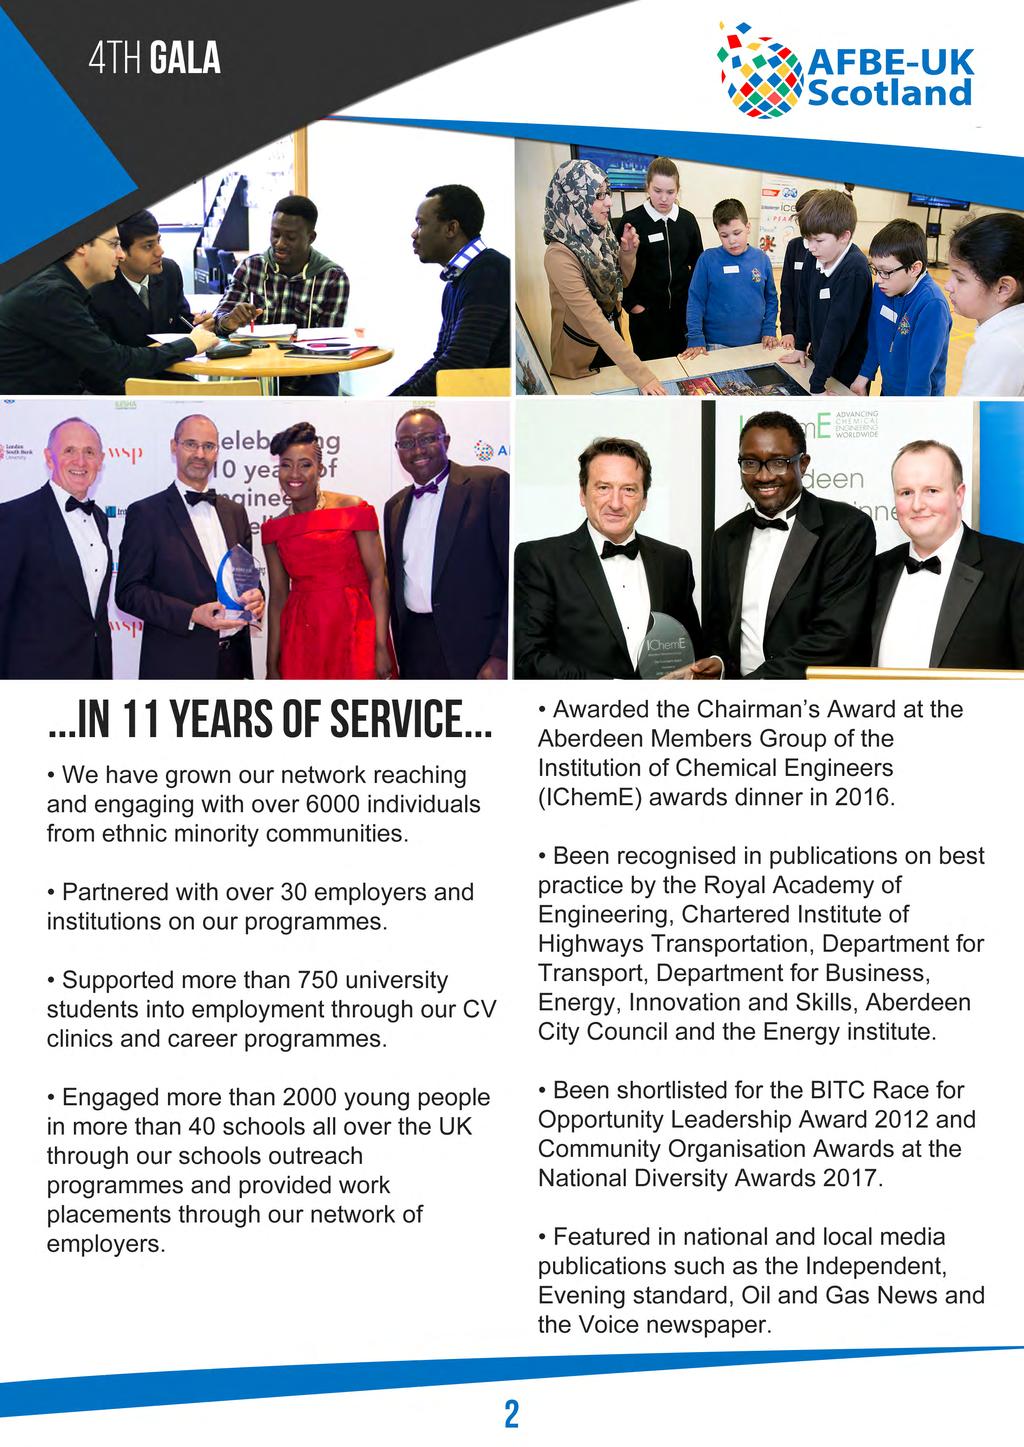 ...in 11 years of service... We have grown our network reaching and engaging with over 6000 individuals from ethnic minority communities.